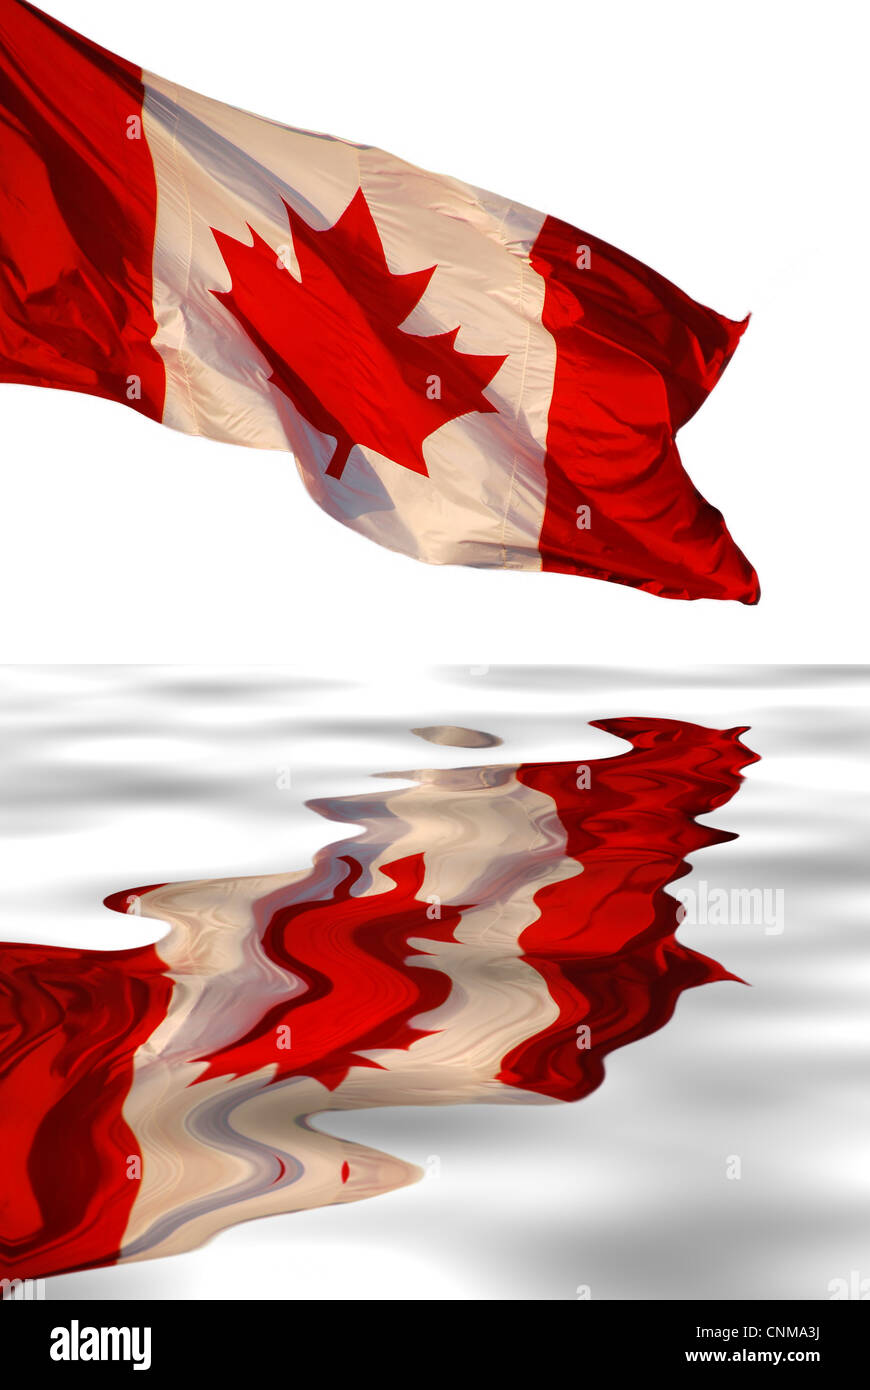 Canadian flag reflects in water Stock Photo